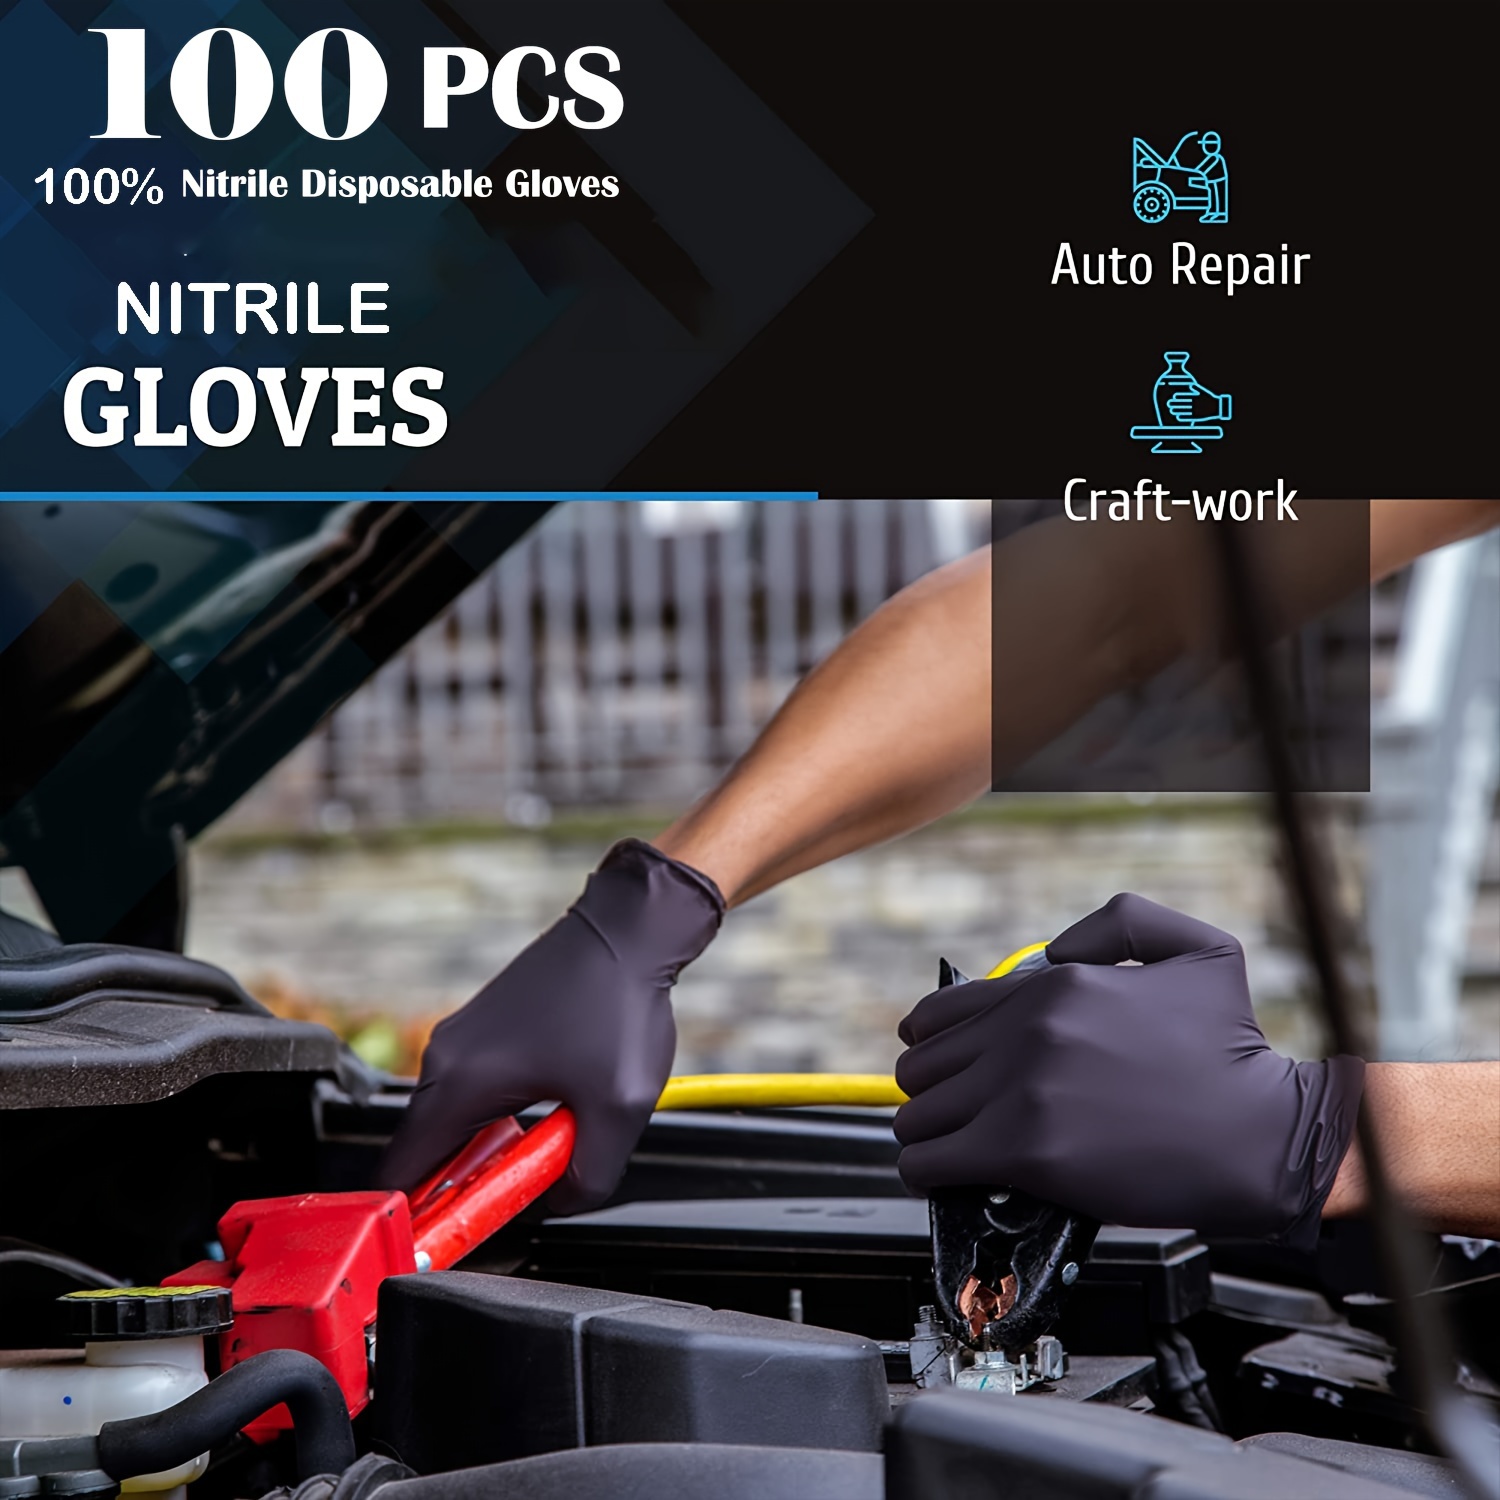 

100pcs Black Nitrile Disposable Gloves, Touch Disposable Gloves, Latex Free-5 Mil Thickness Nitrile Disposable Gloves For Cleaning, Food Handling